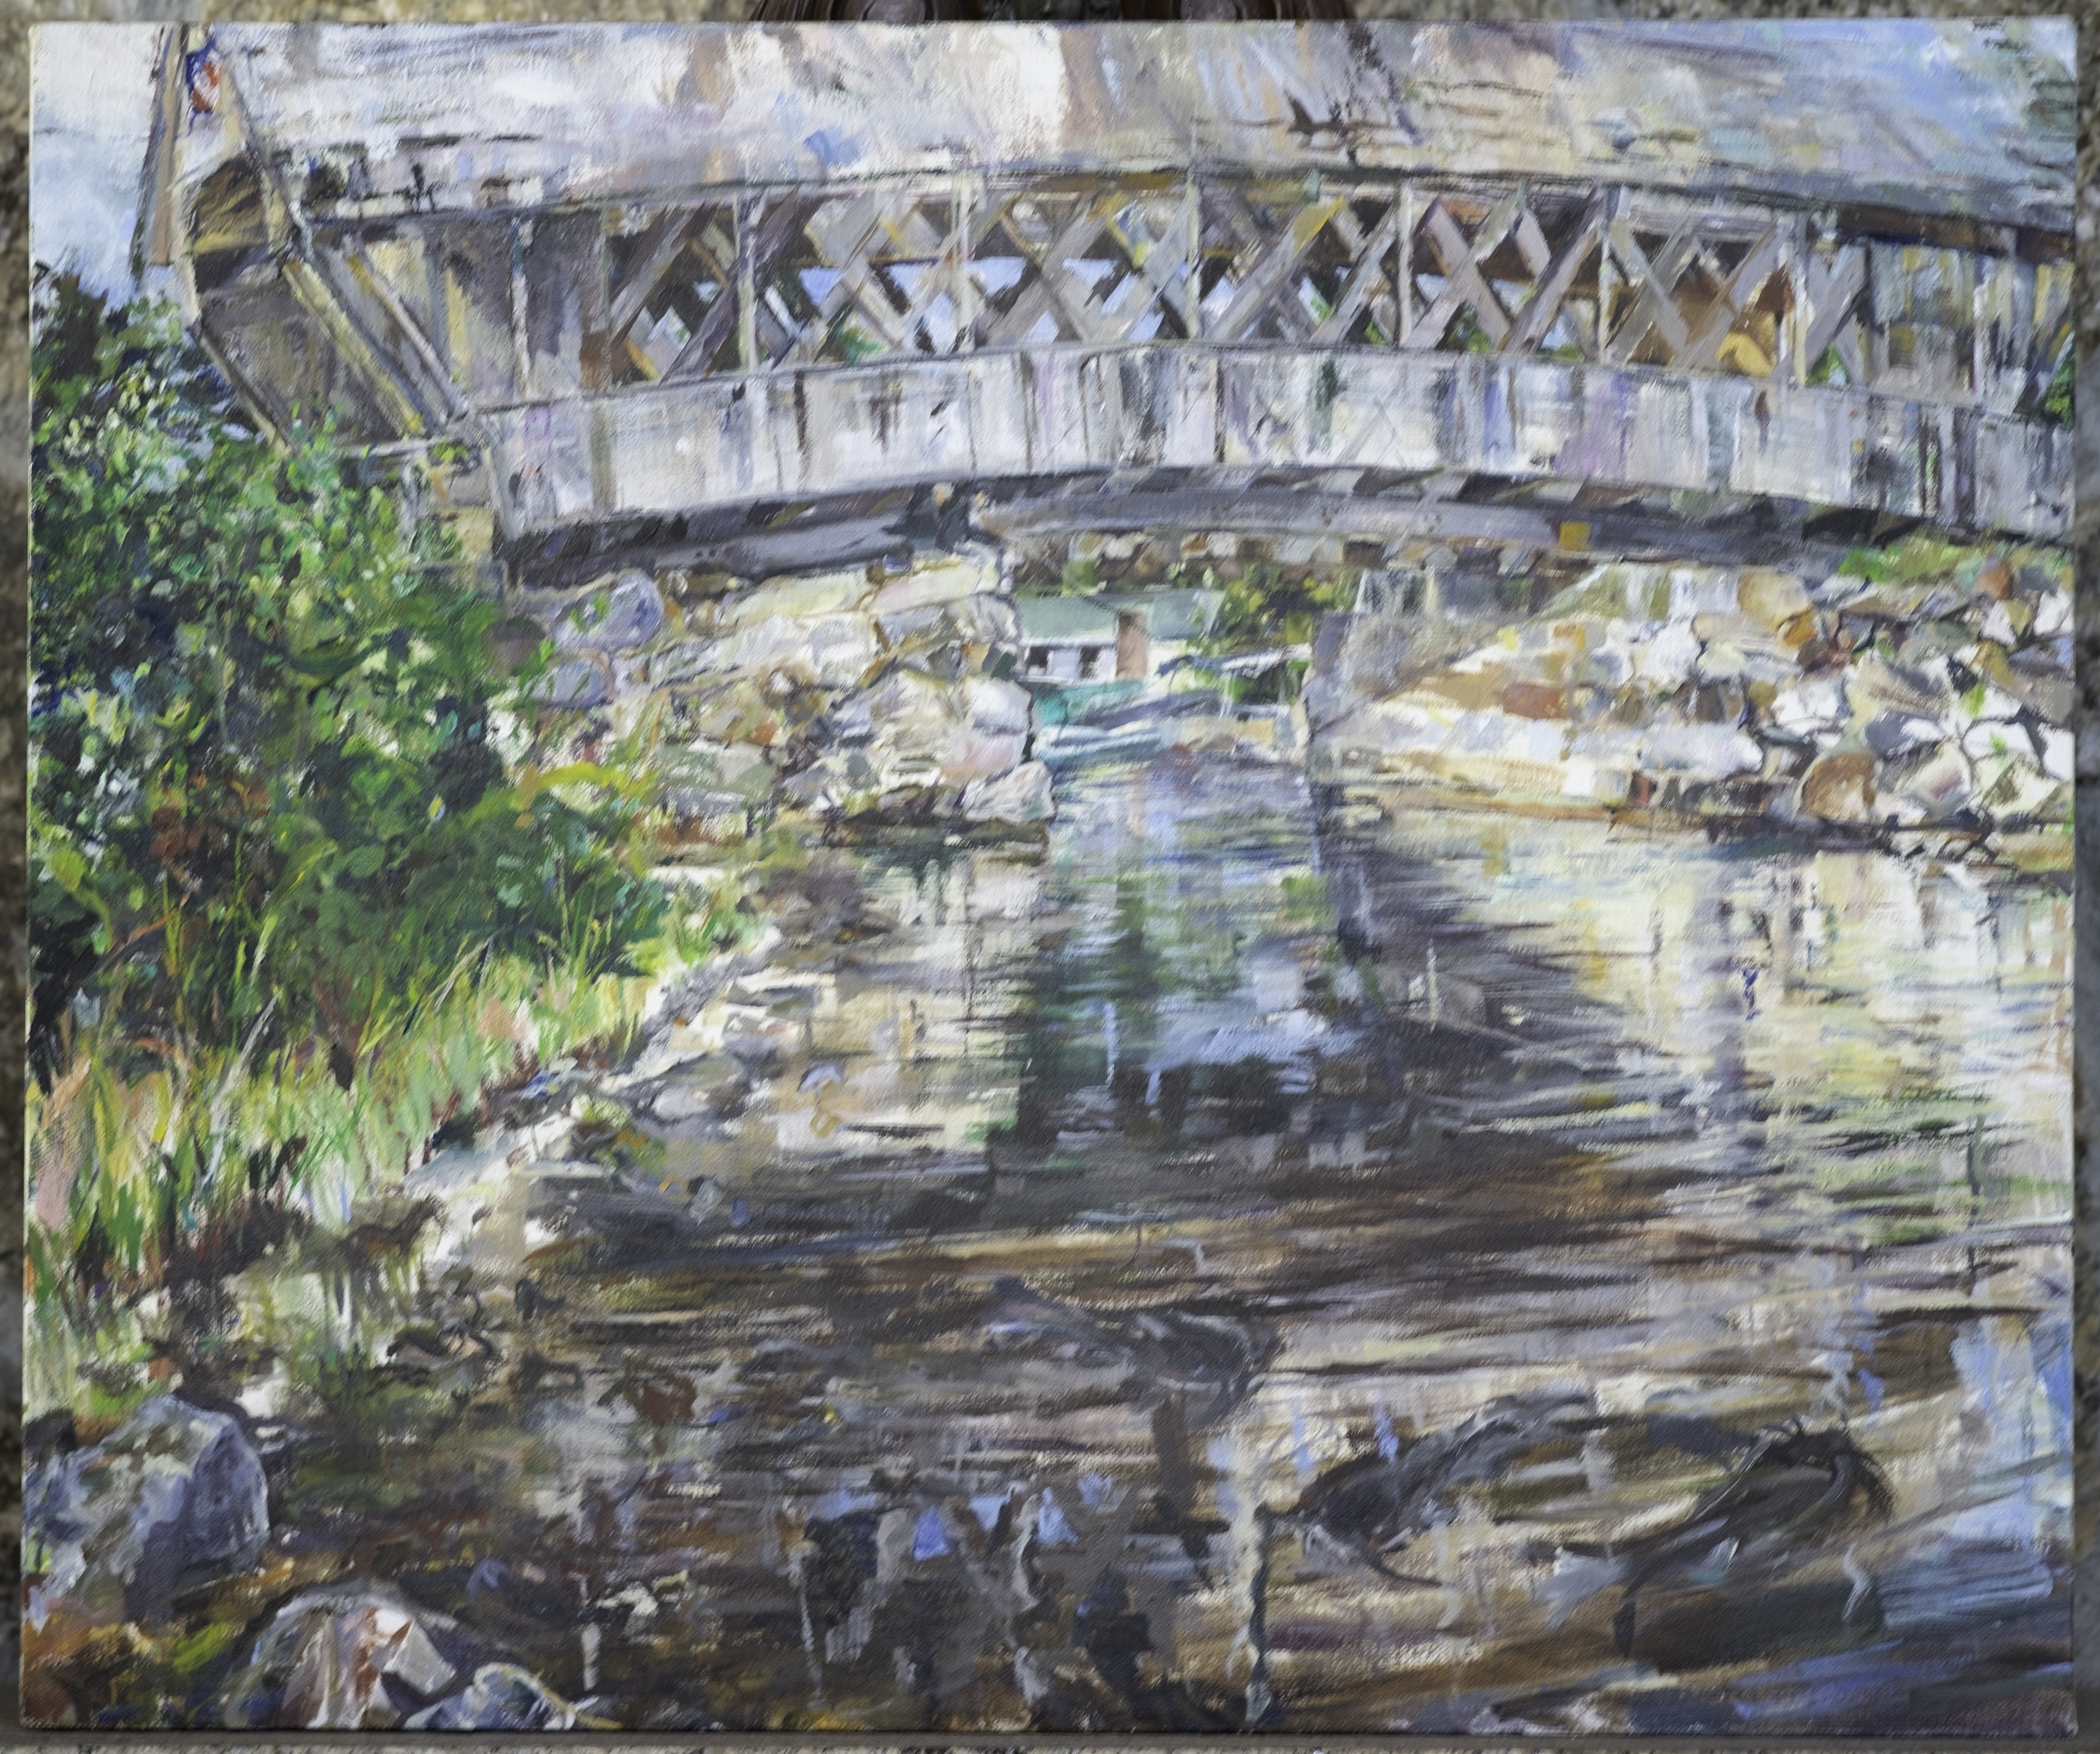 oil painting of covered bridge with fish, fishermen, and an American flag